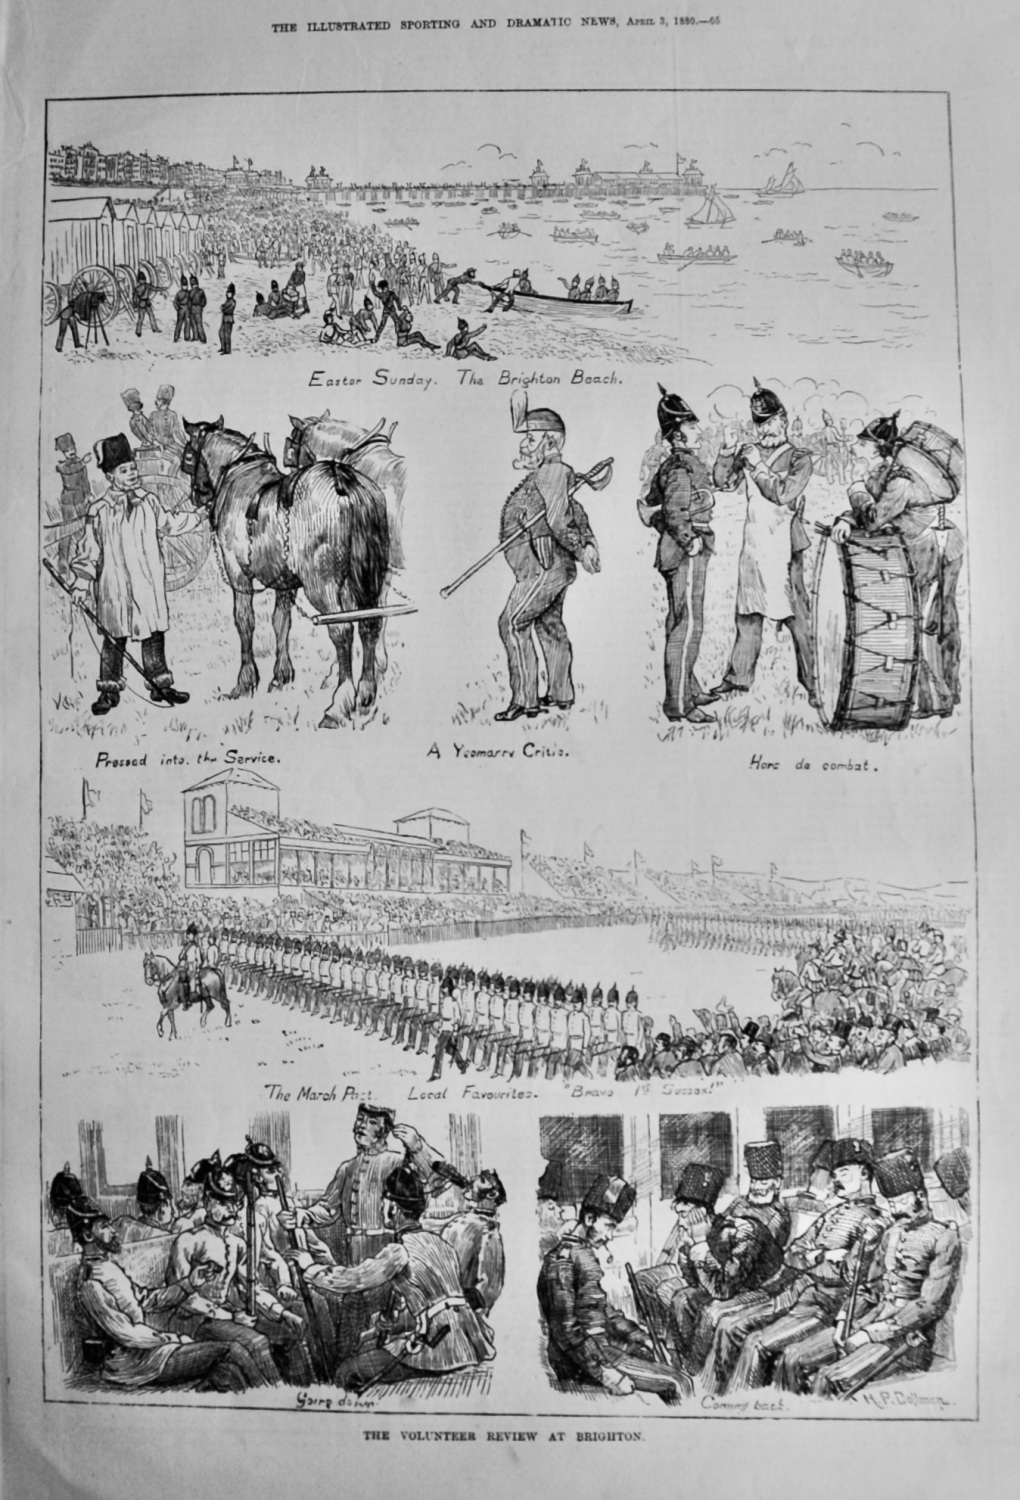 The Volunteer Review at Brighton.  1880.